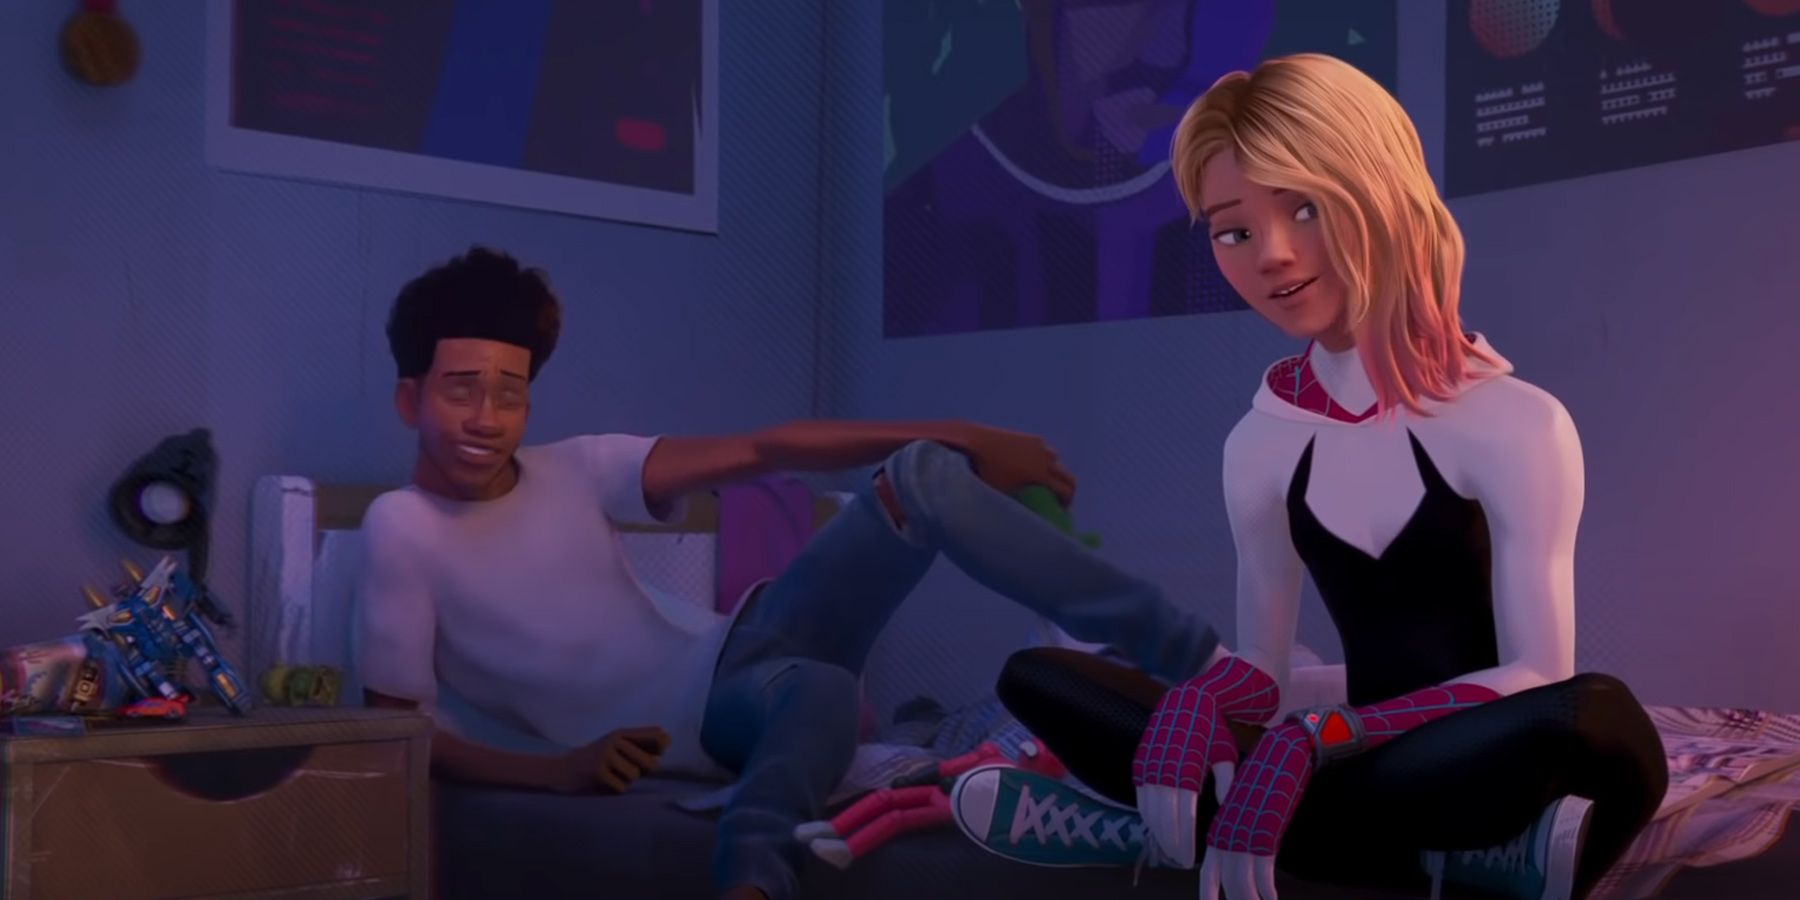 Spider-Gwen with a strange gadget on her right arm